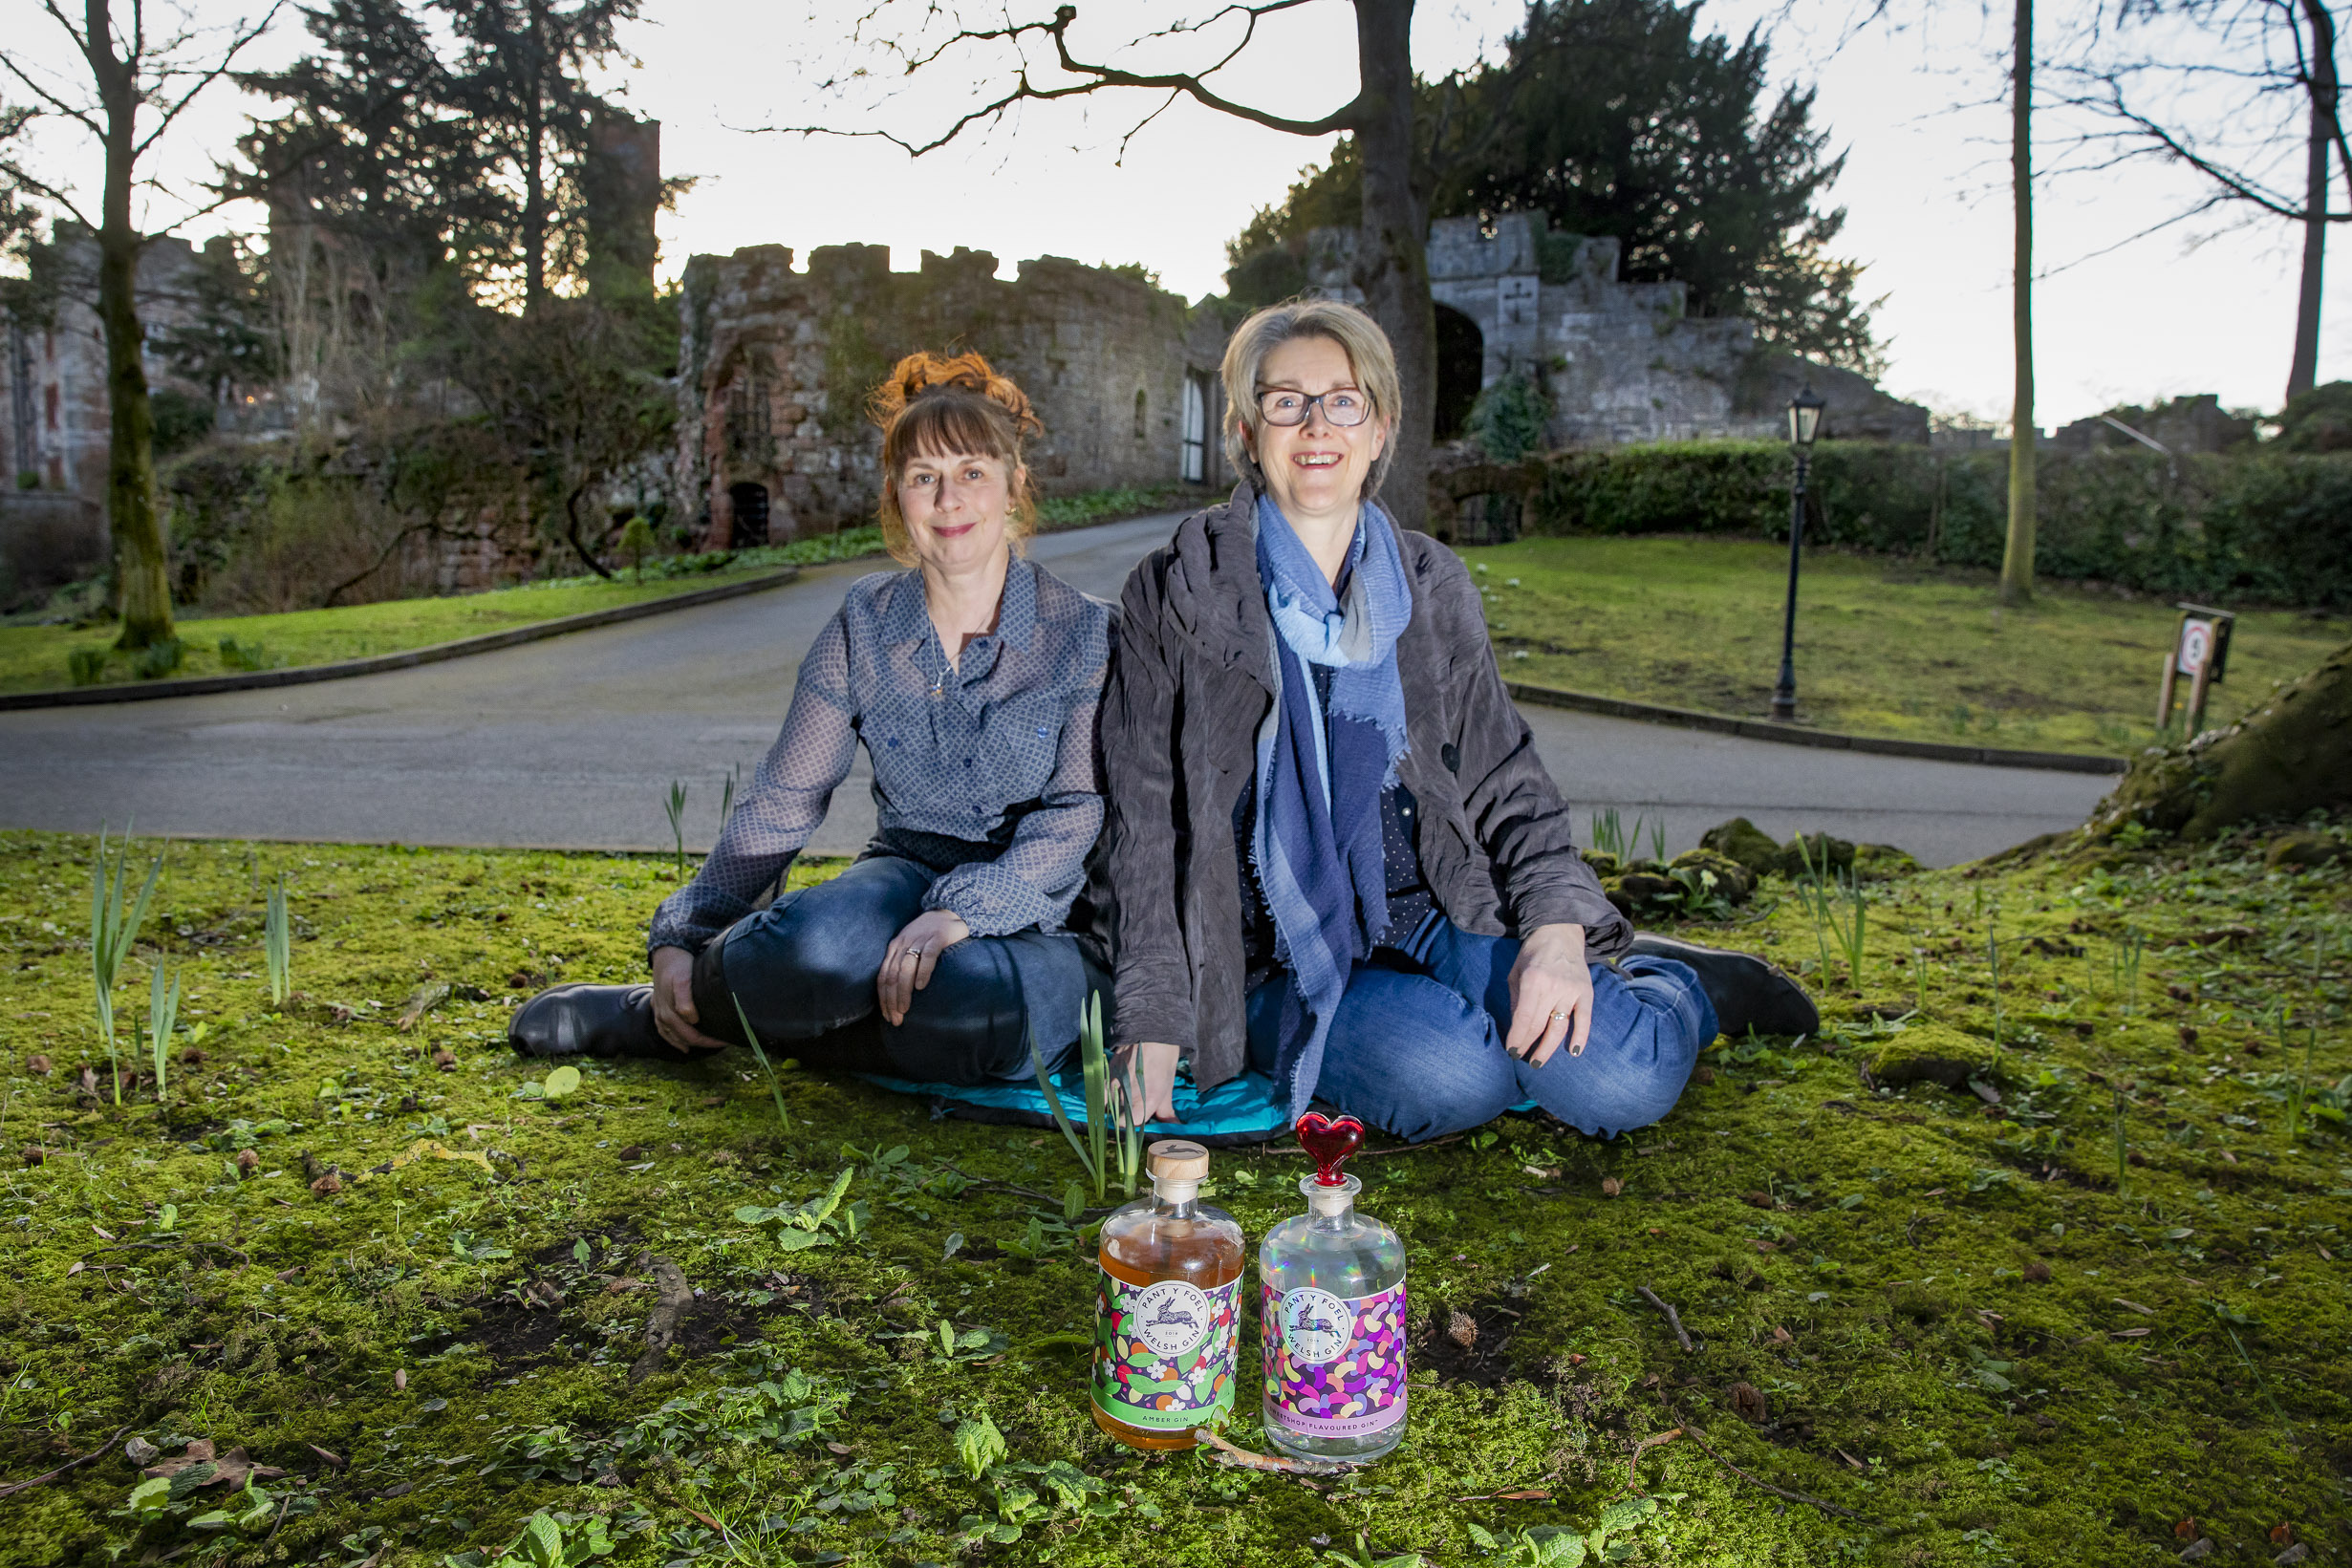 New Denbighshire gin “just the tonic” for Ruthin food networking event